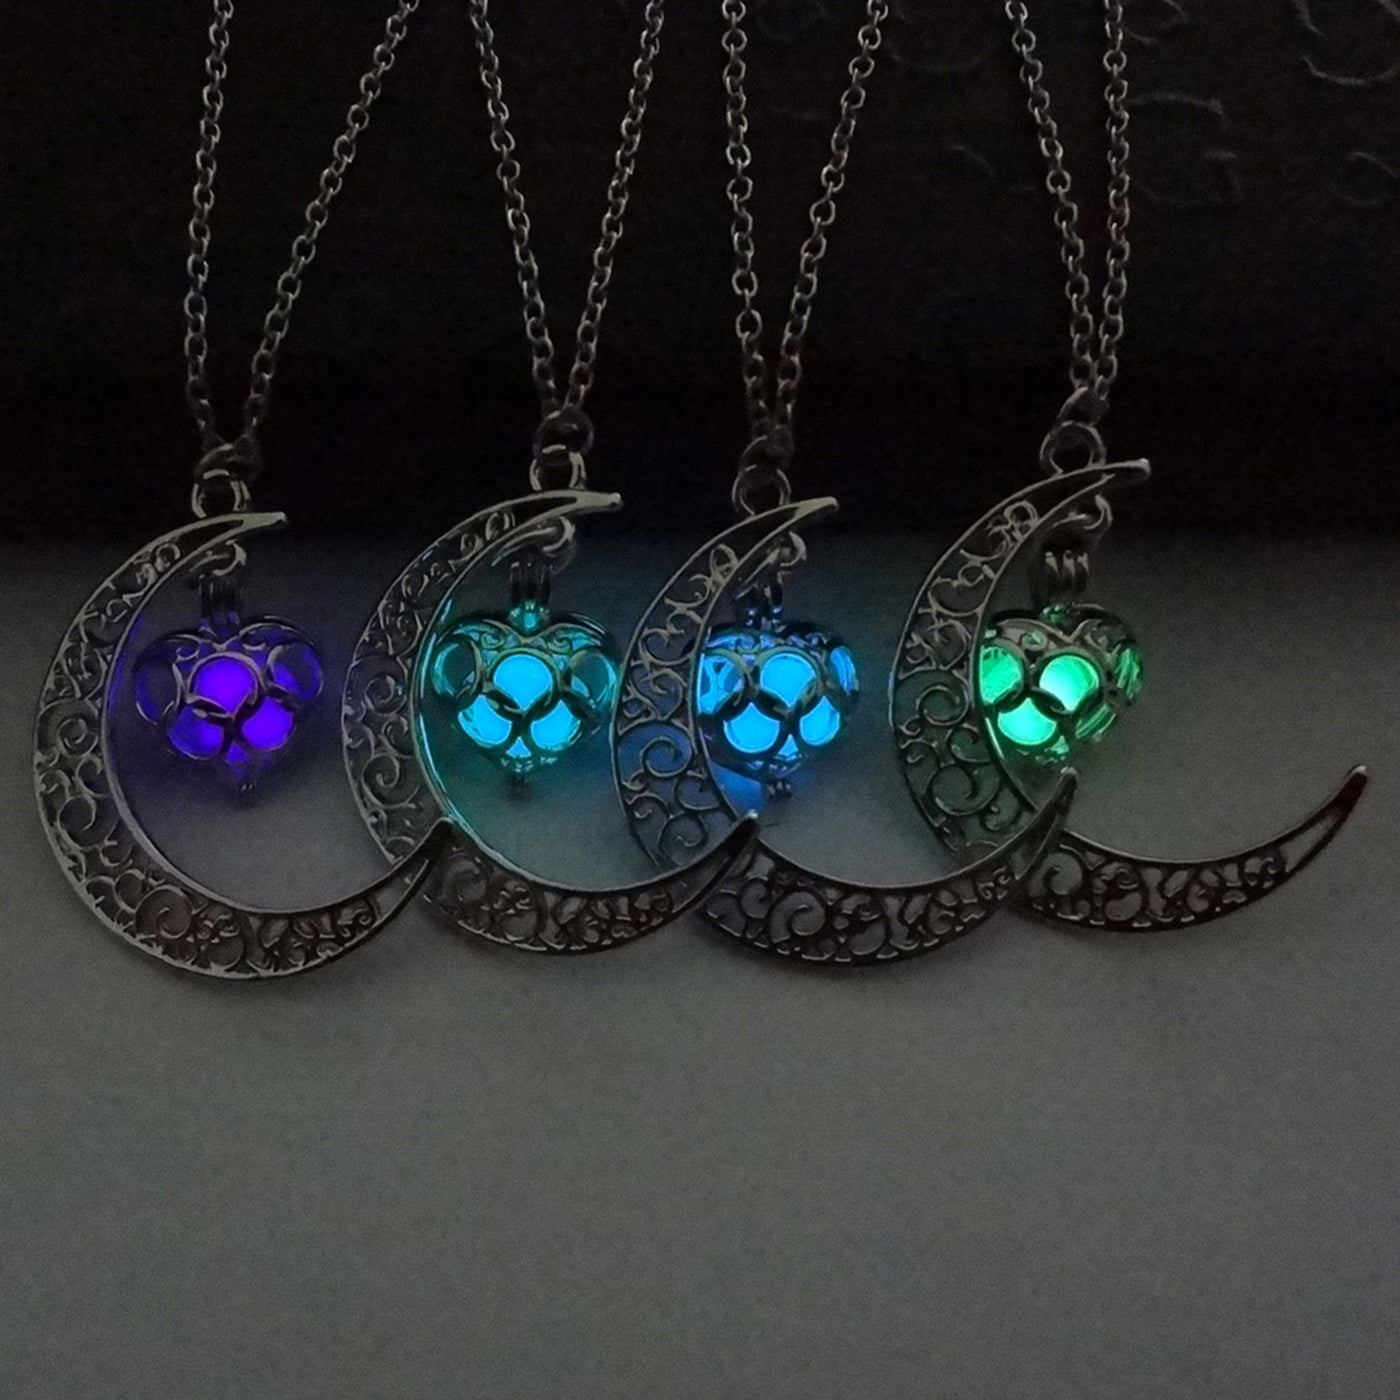 Glowing Heart of the Crescent Moon Pendant Necklace